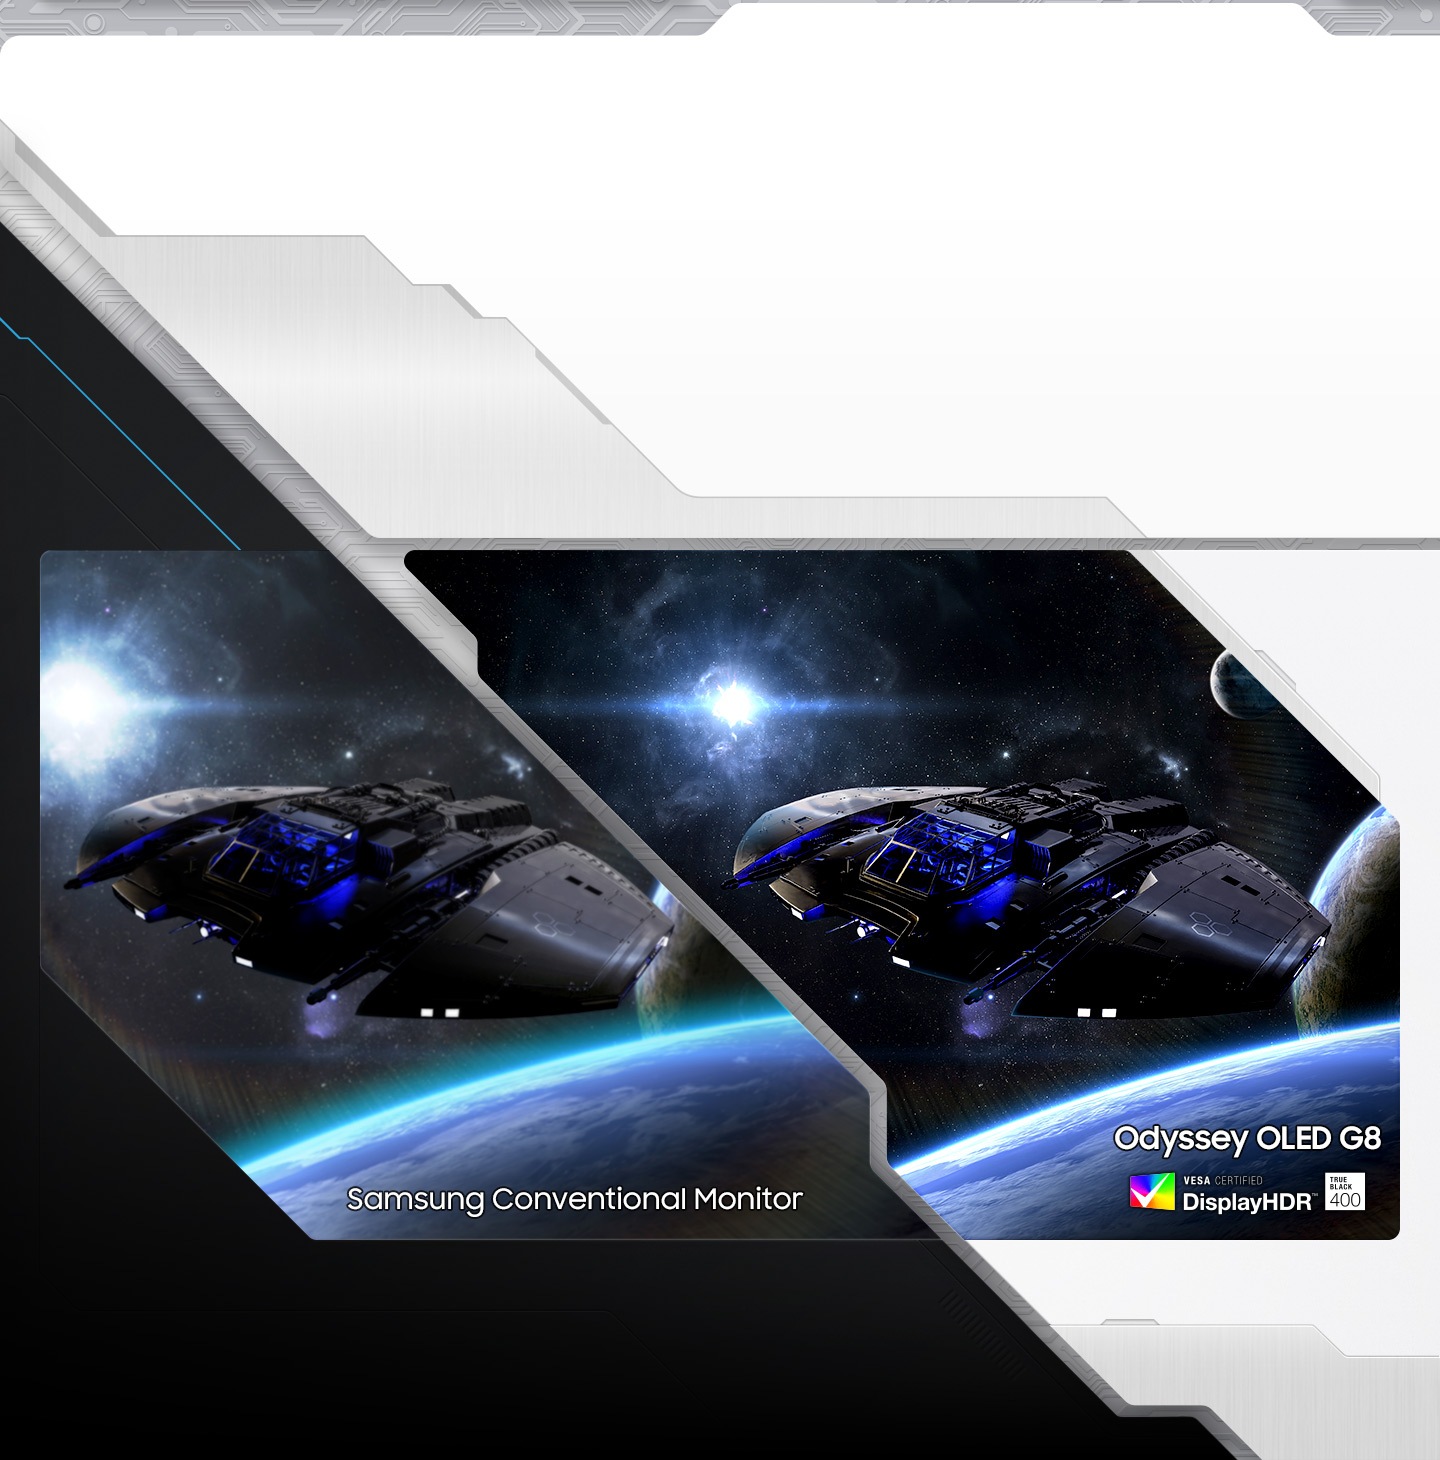 An outer space scene, dissected down the middle of the screen, with a black and blue spaceship flying over and past three planets with stars in the background. The text overlay on the space scene reads, “Samsung Conventional Monitor” on the bottom left, and “VESA CERTIFIED DisplayHDR True Black 400” on the bottom right along with “Odyssey OLED G8” directly above.